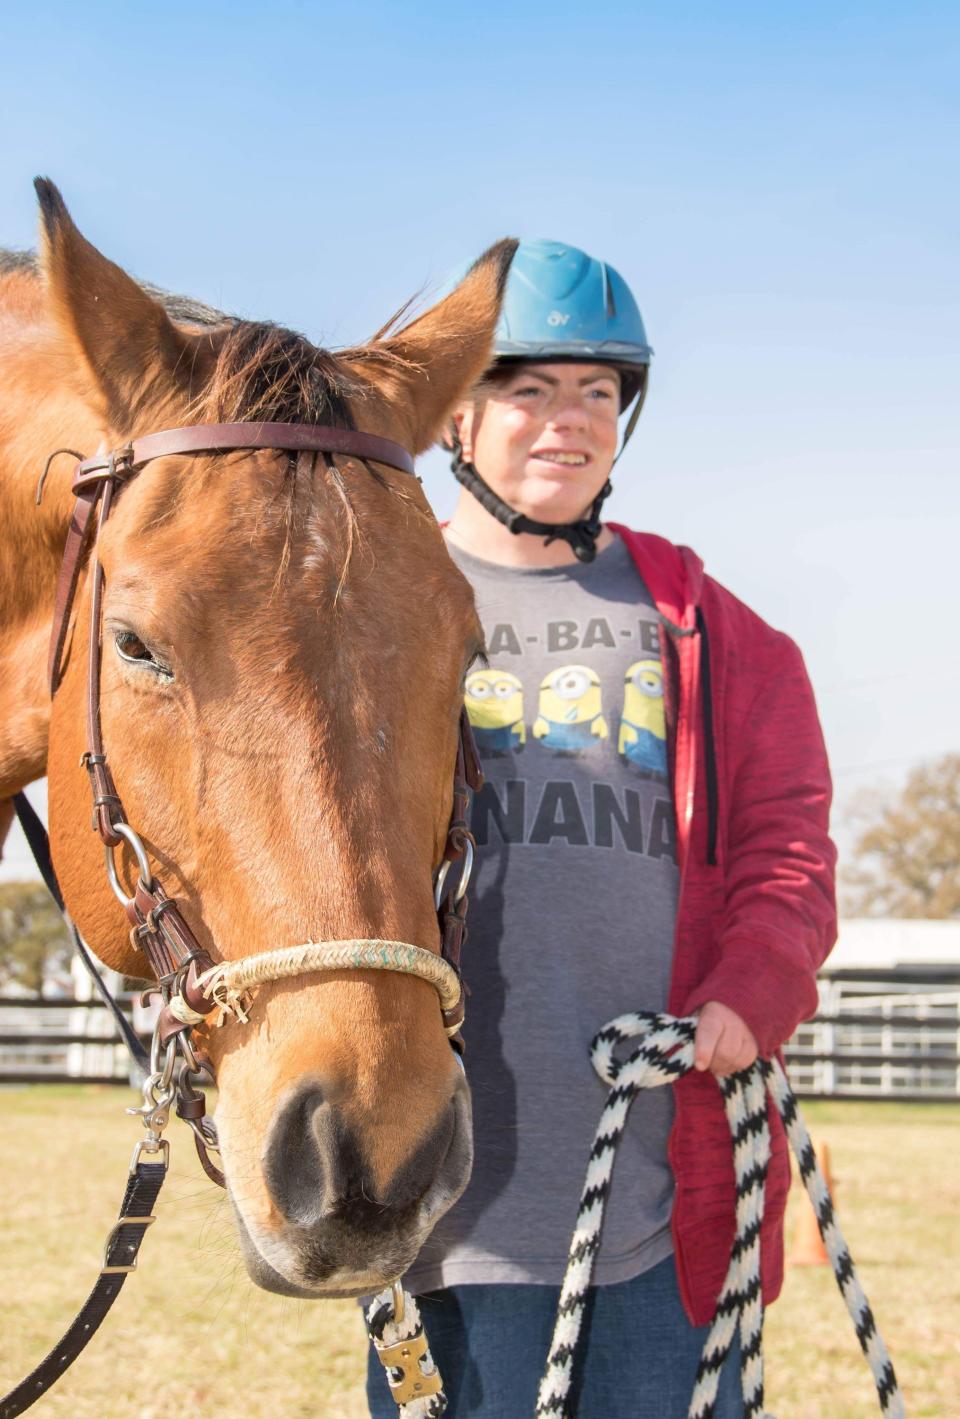 Stephen Gersuk, who is 40 and lives at the Denton State Supported Living Center, stands by a horse at a therapeutic riding center in Aubrey, TX. Staffers from the center take Gersuk to the riding center every Friday.